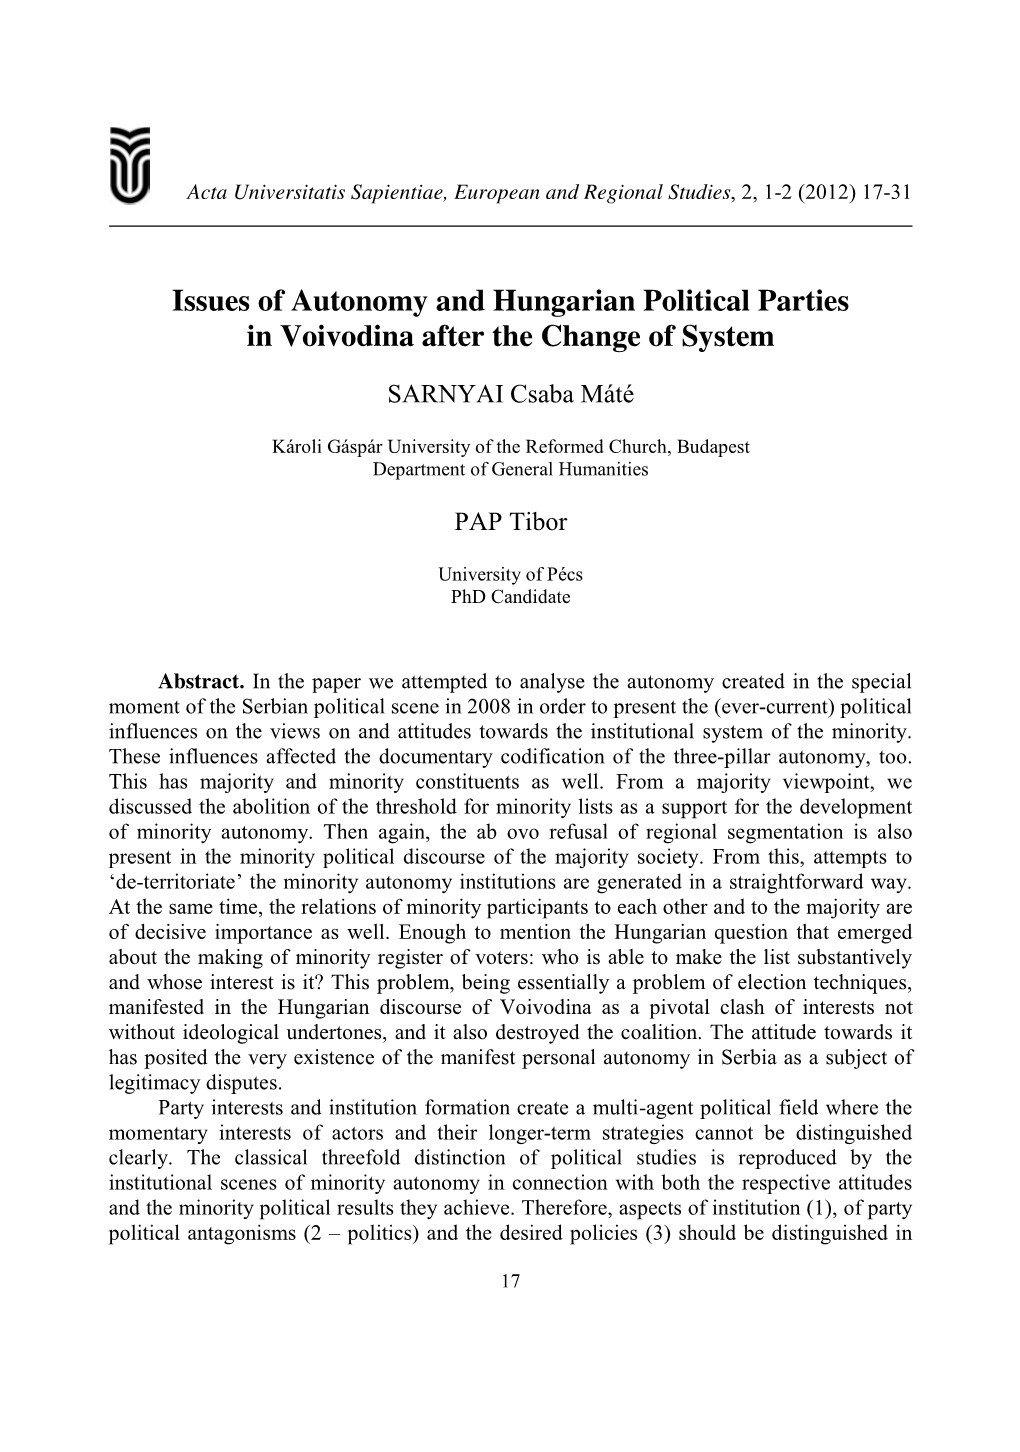 Issues of Autonomy and Hungarian Political Parties in Voivodina After the Change of System